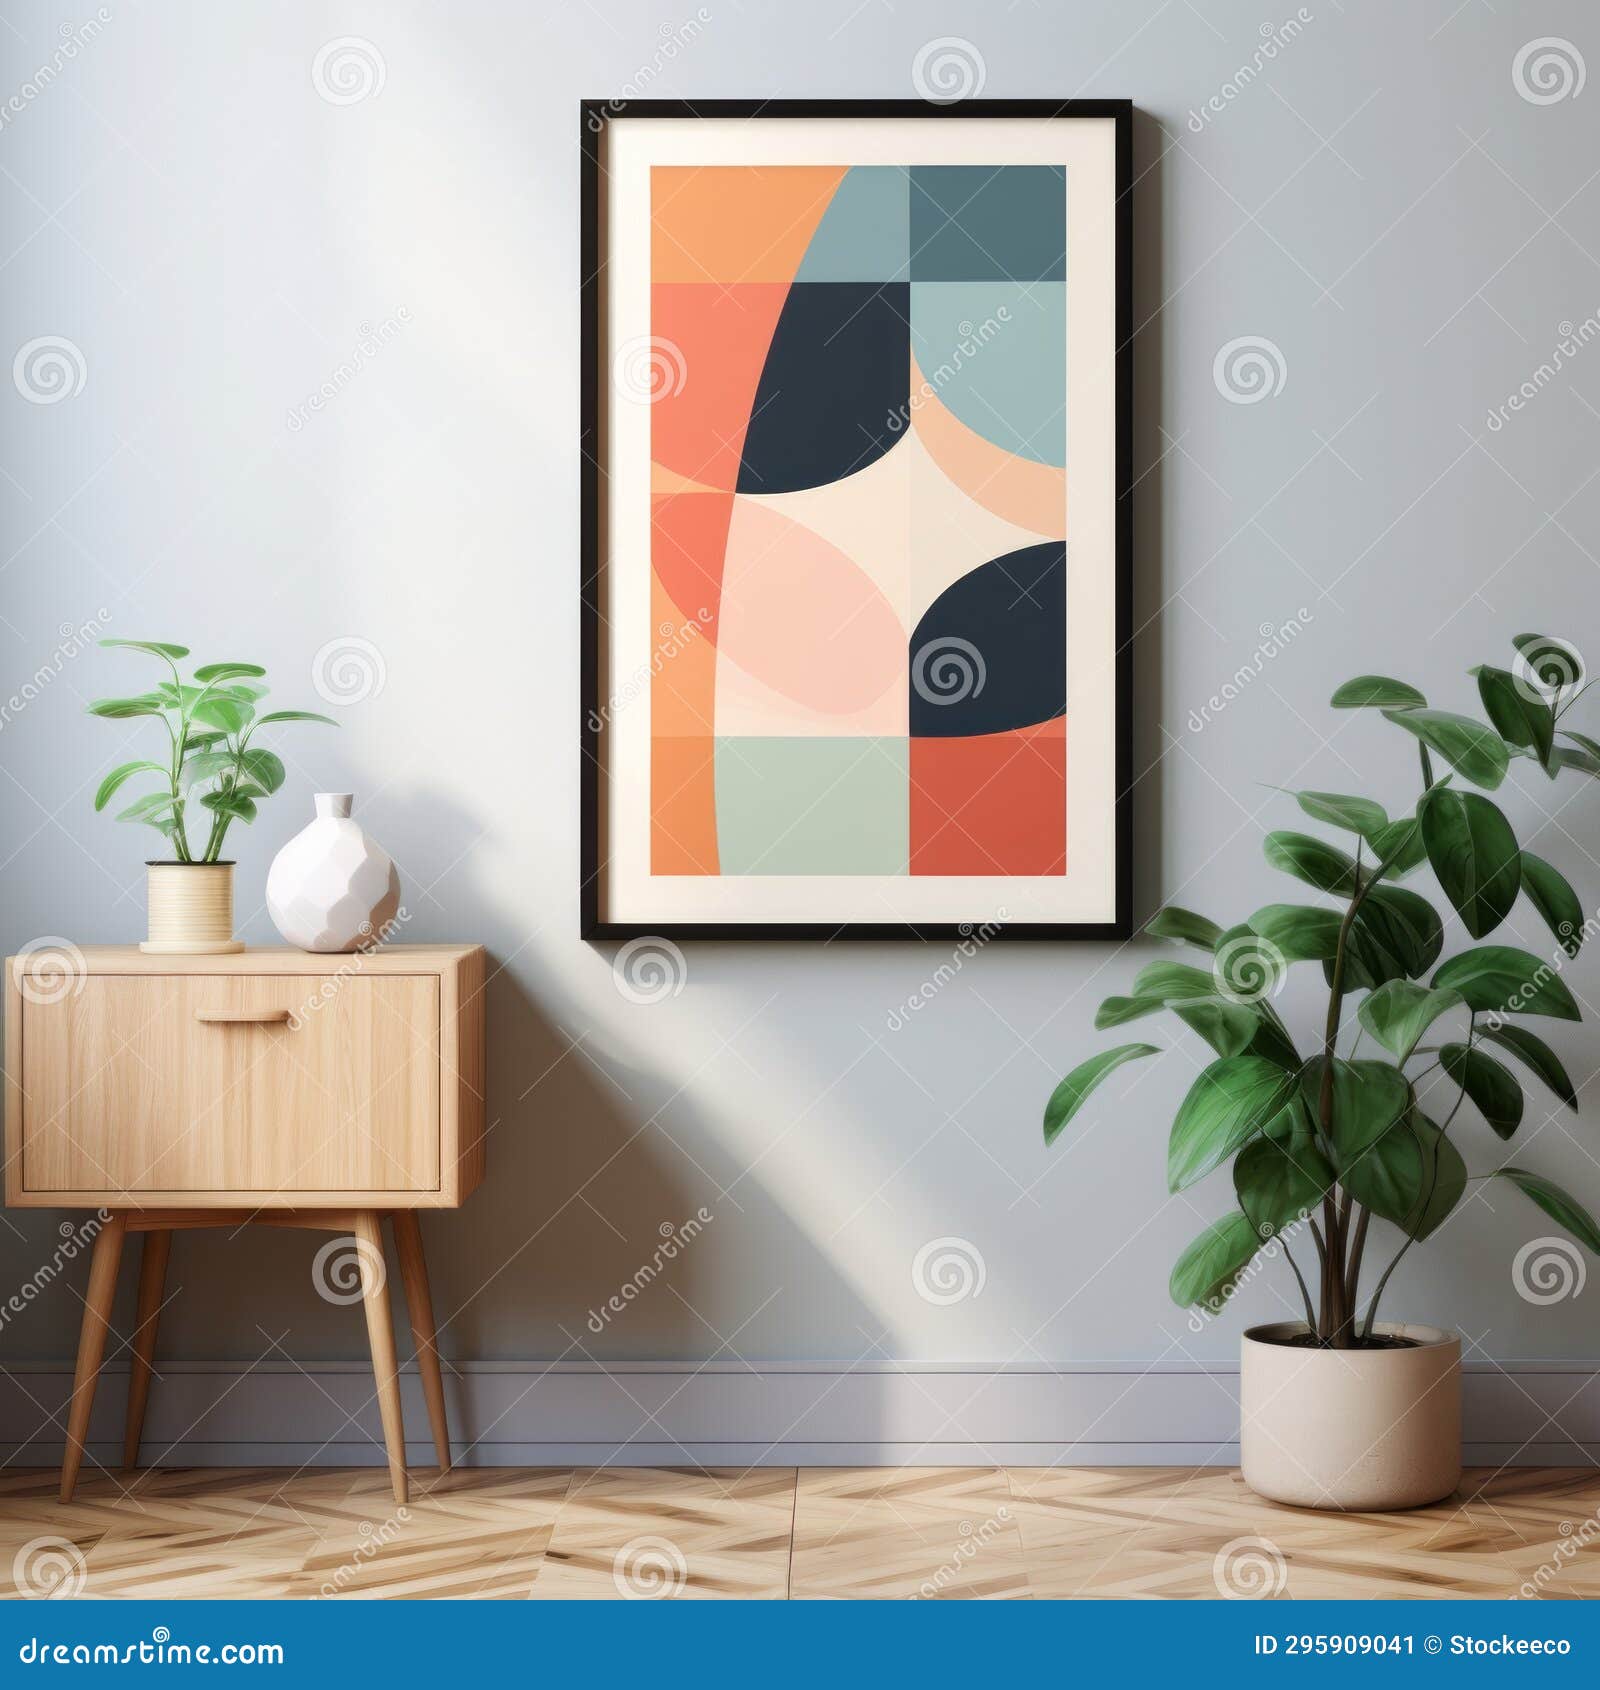 Colorful Abstract Modern Art Frame Mid-century Illustration Style Stock ...